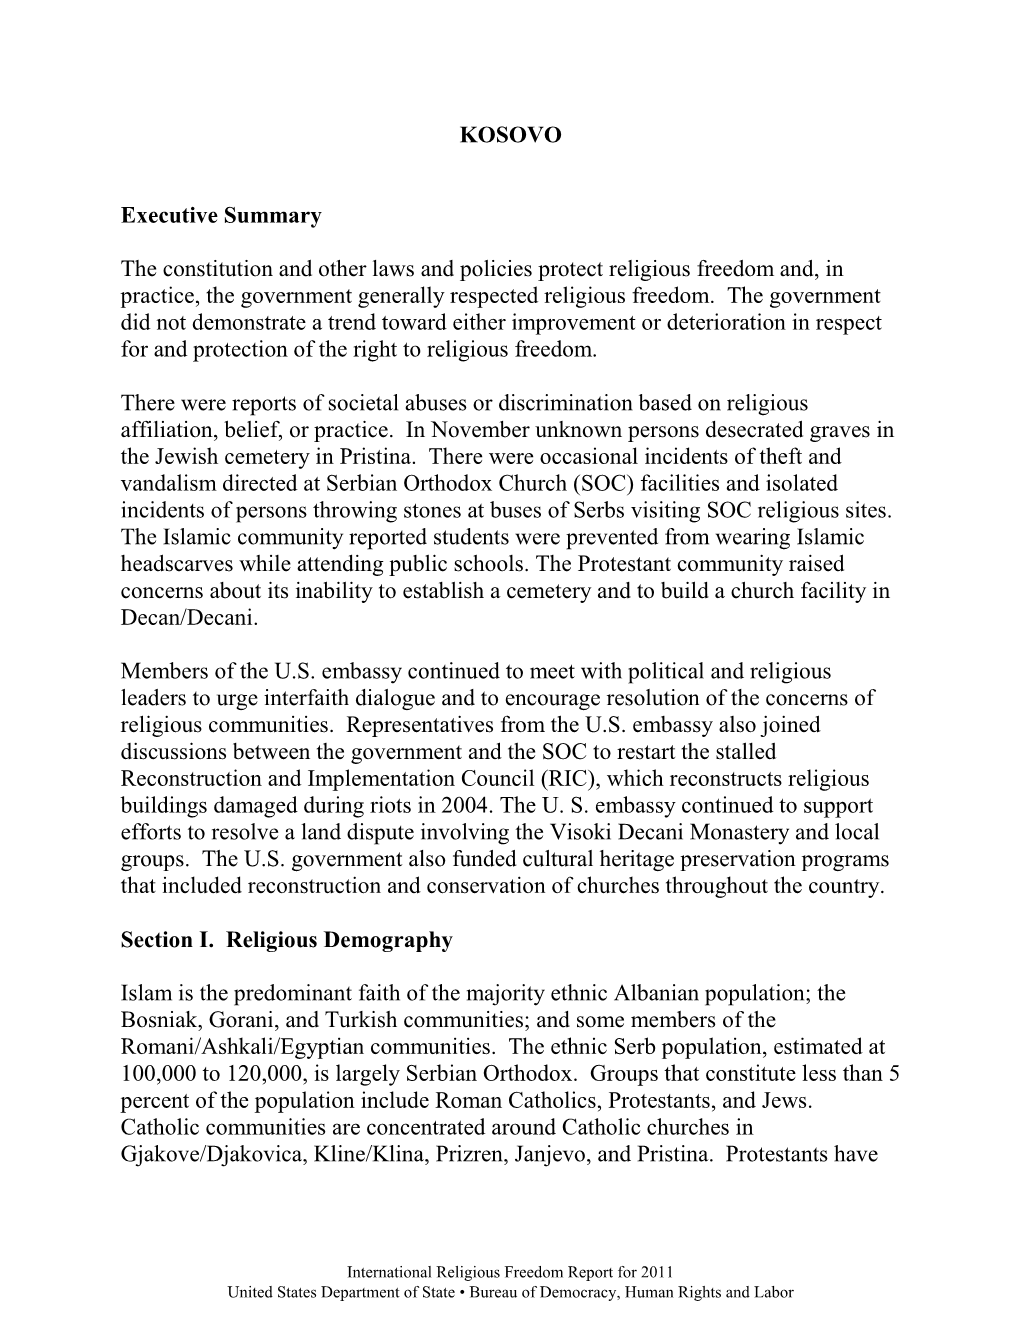 KOSOVO Executive Summary the Constitution and Other Laws and Policies Protect Religious Freedom And, in Practice, the Government